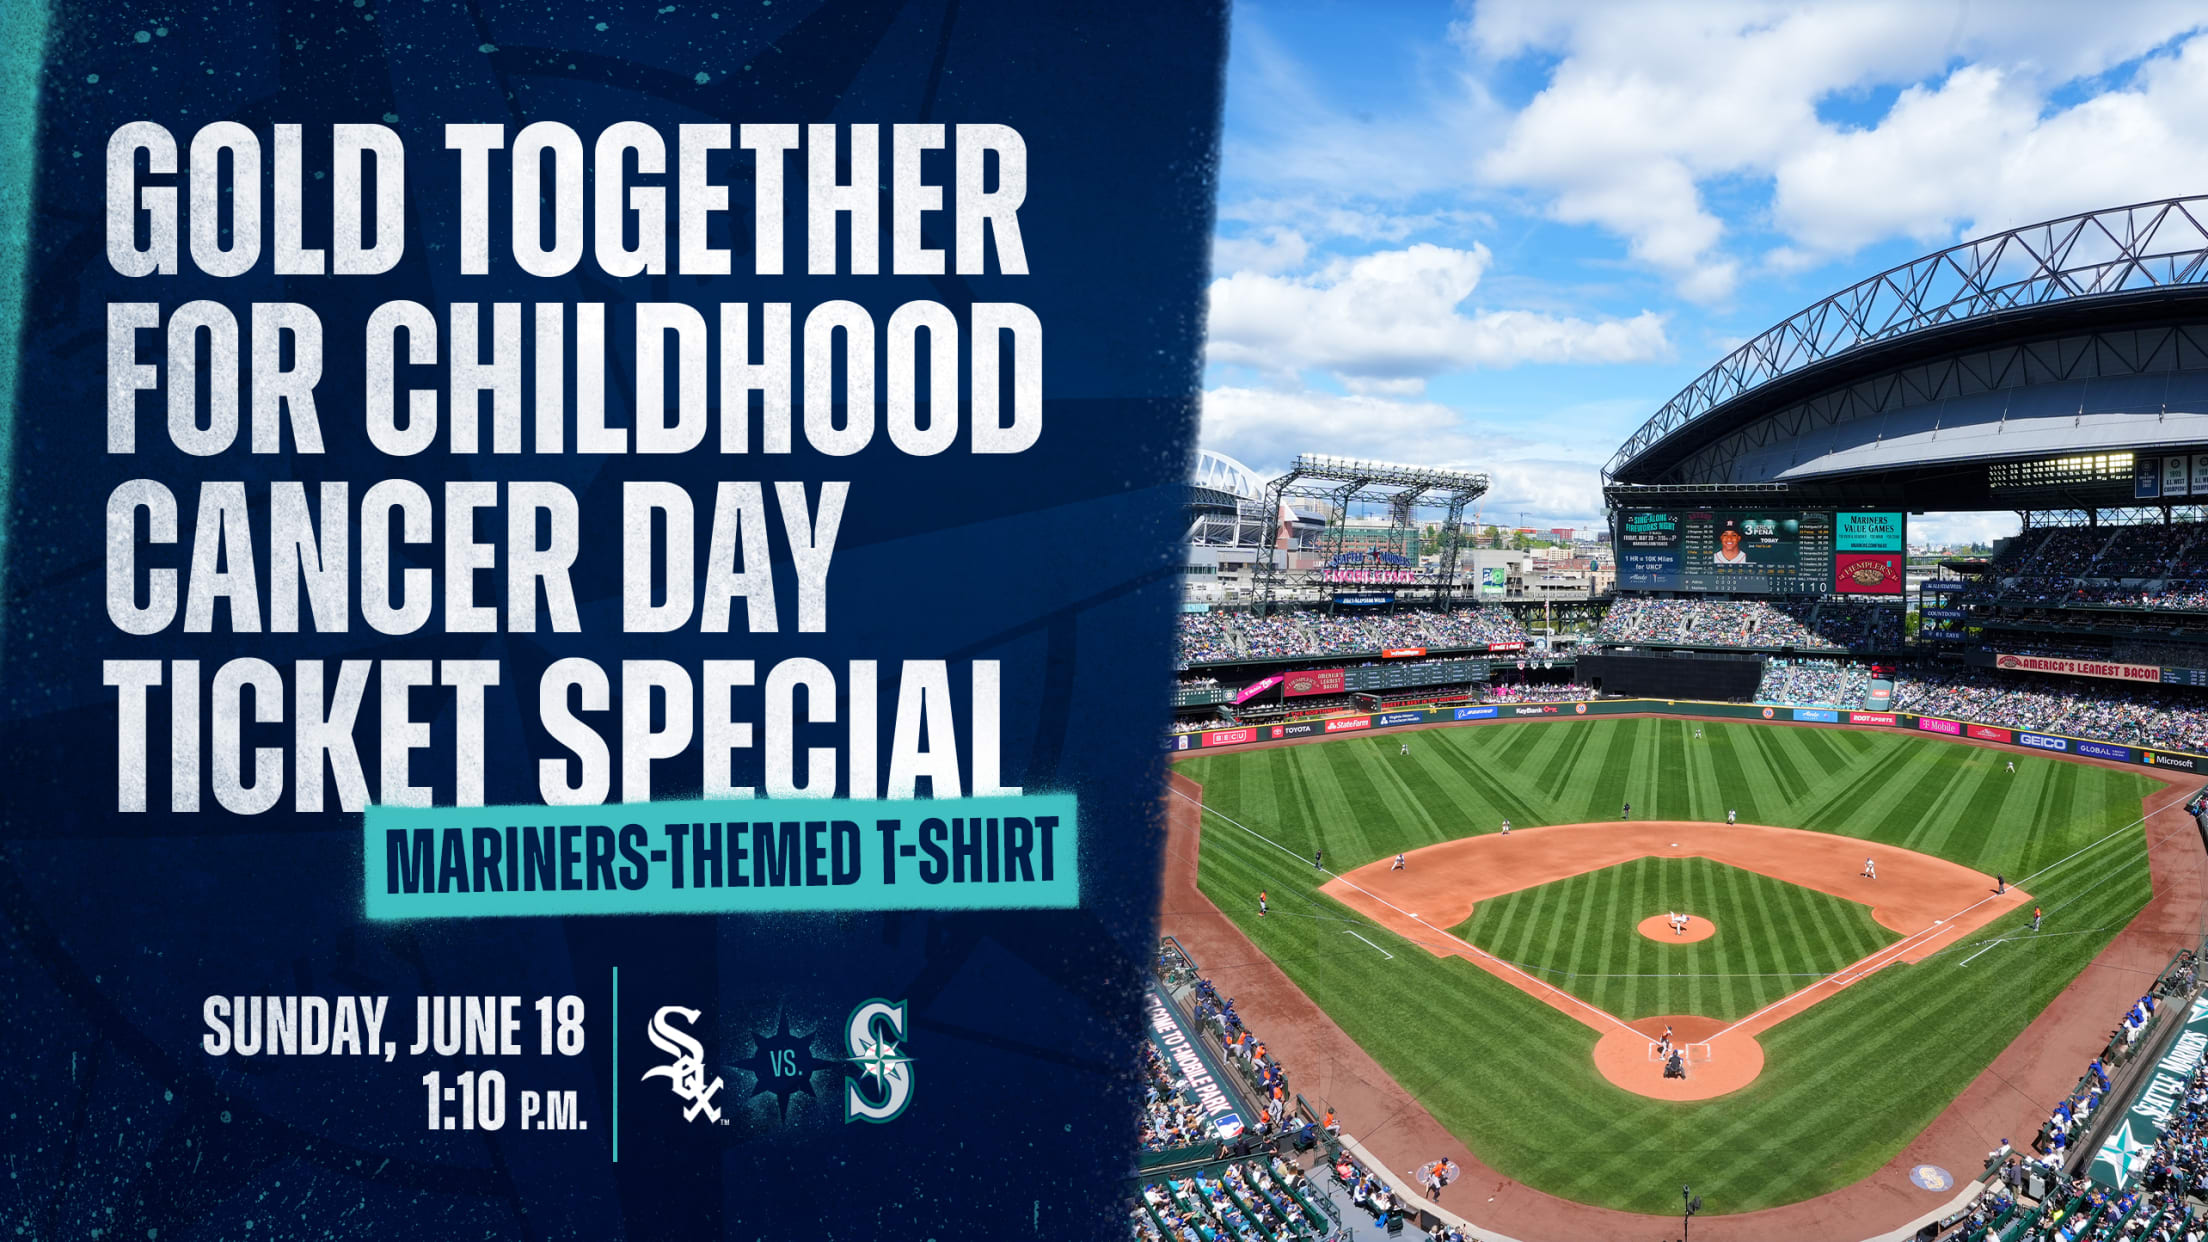 Join New Day at T-Mobile Park for a special Mariners-themed show!